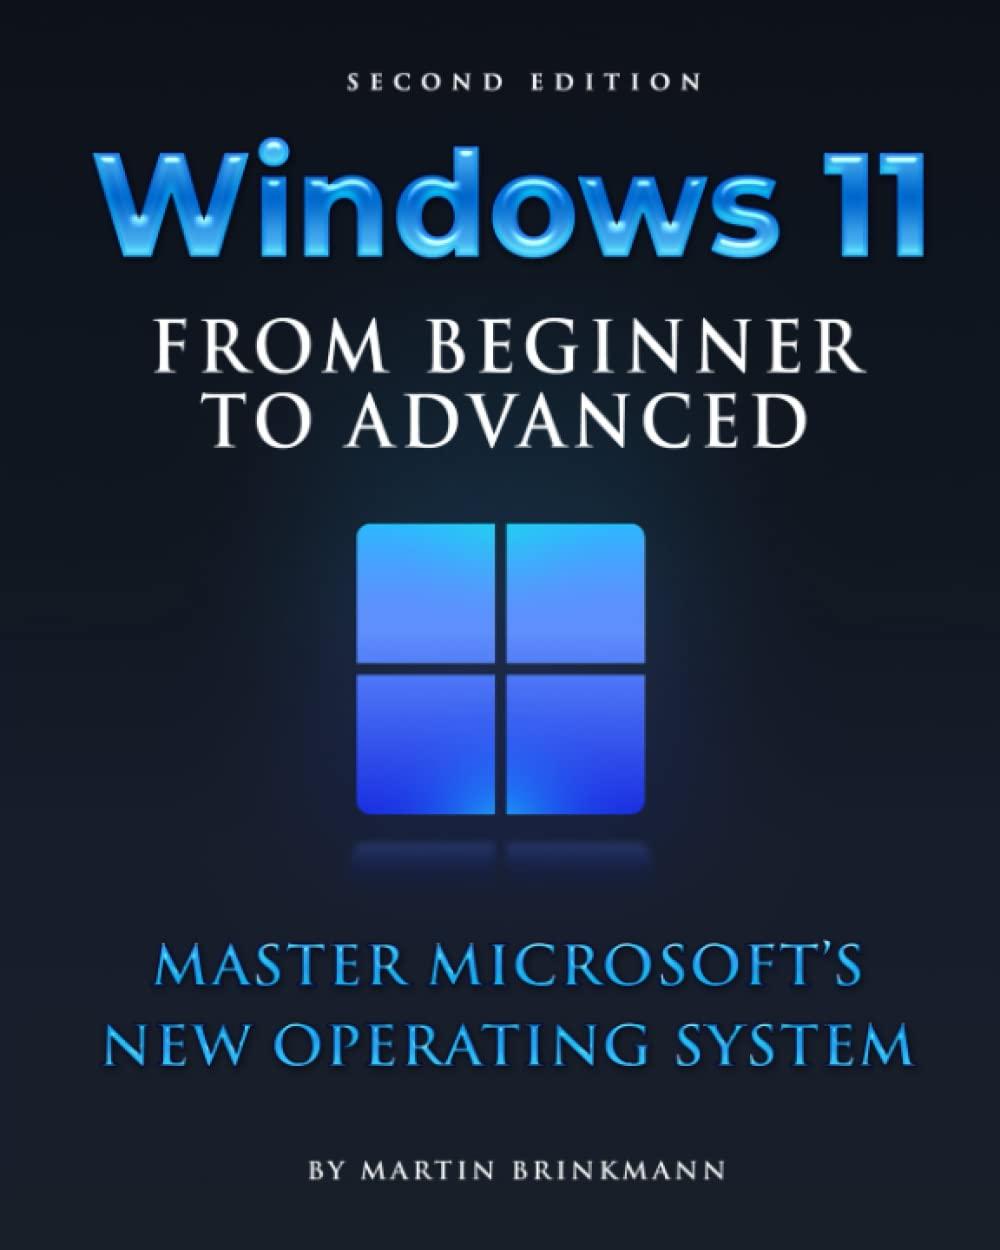 windows 11 from beginner to advanced master microsoft’s new operating system 1st edition martin brinkmann